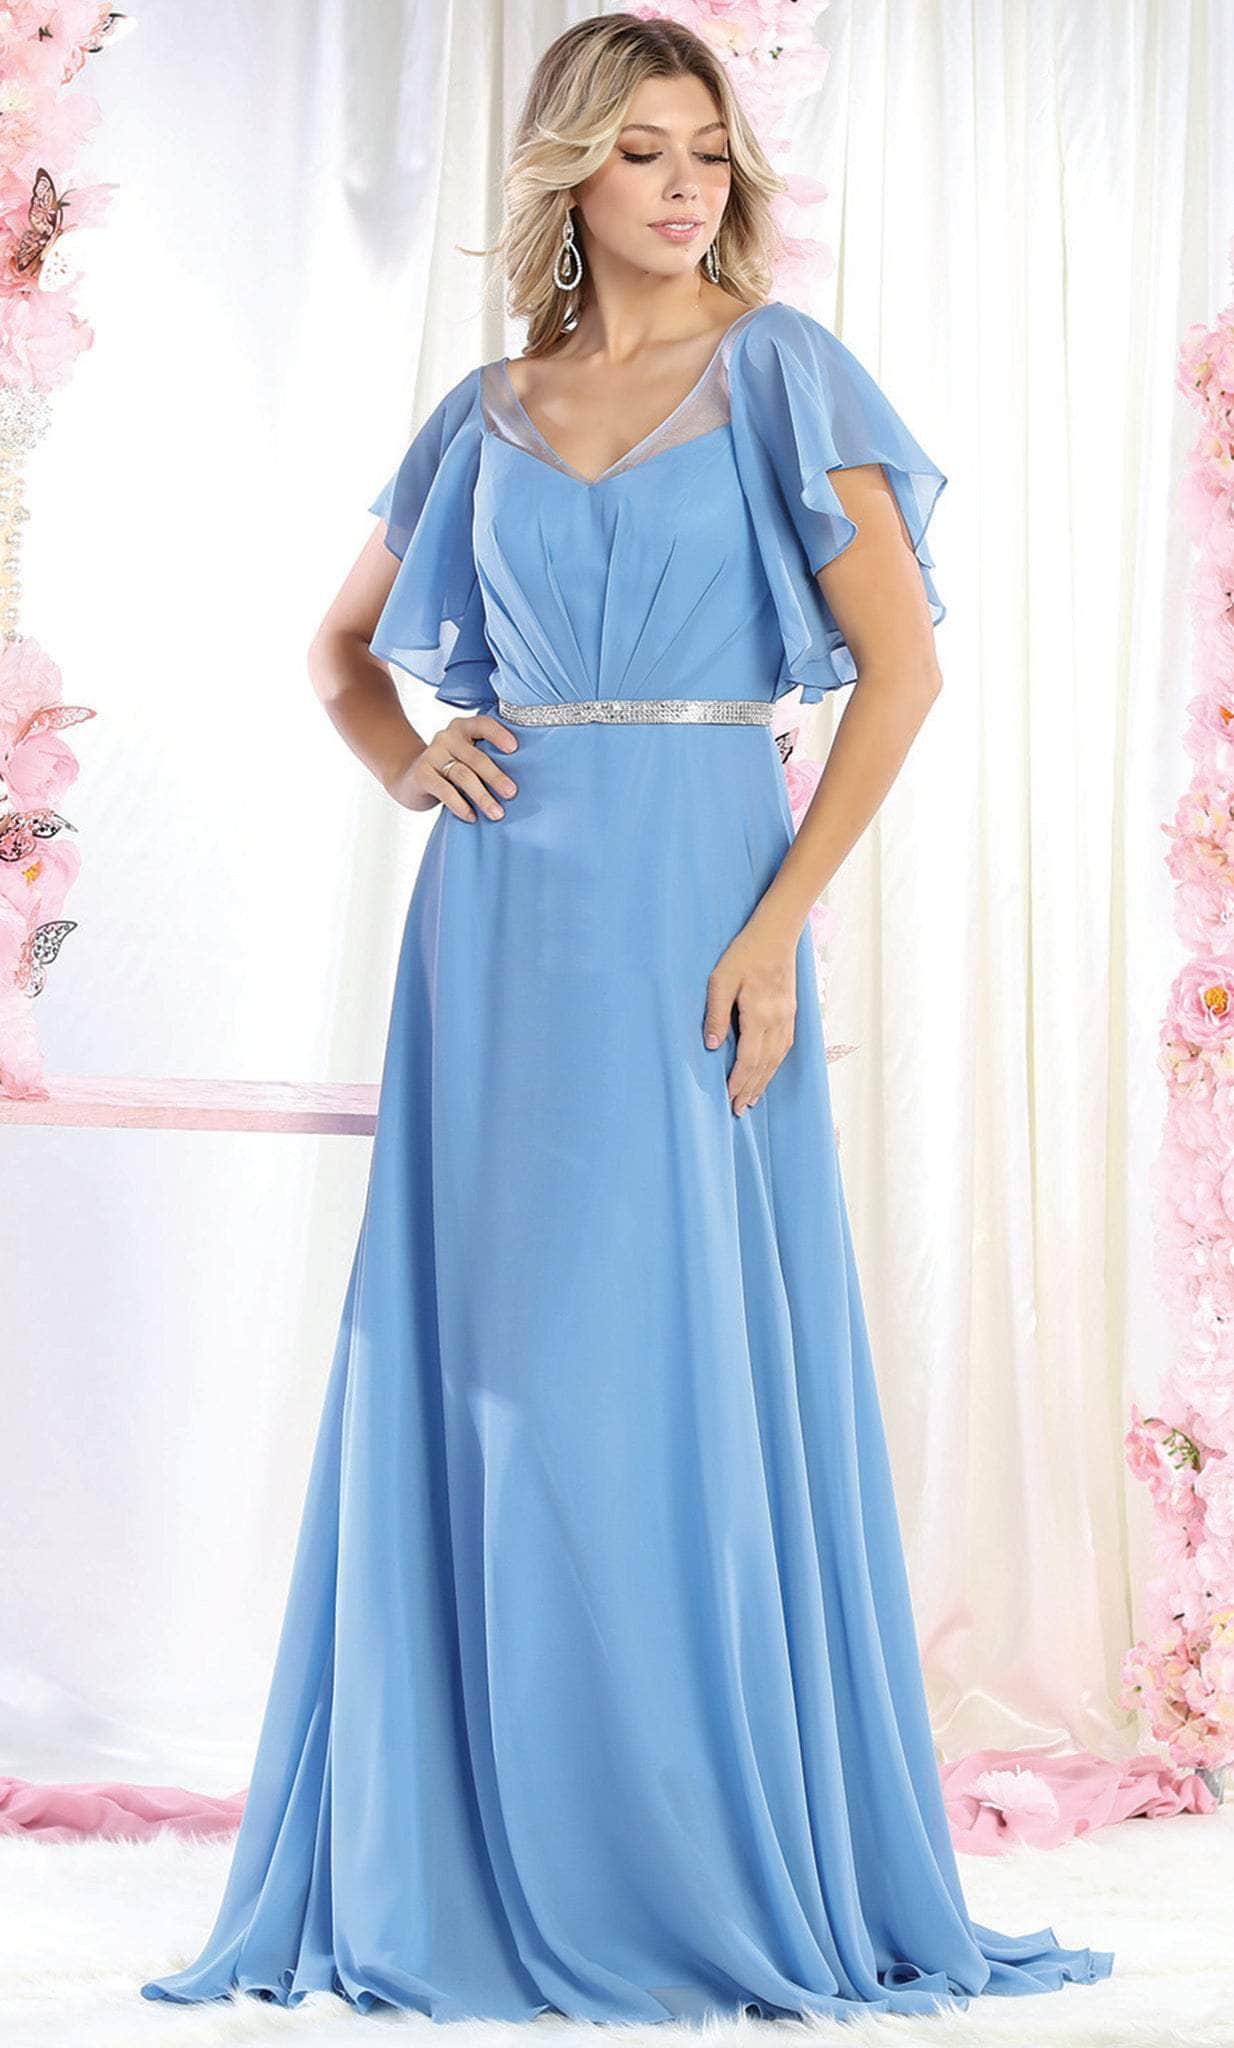 May Queen MQ1972 - Bell Sleeves V Neck A Line Dress Evening Dresses 6 / Dustyblue